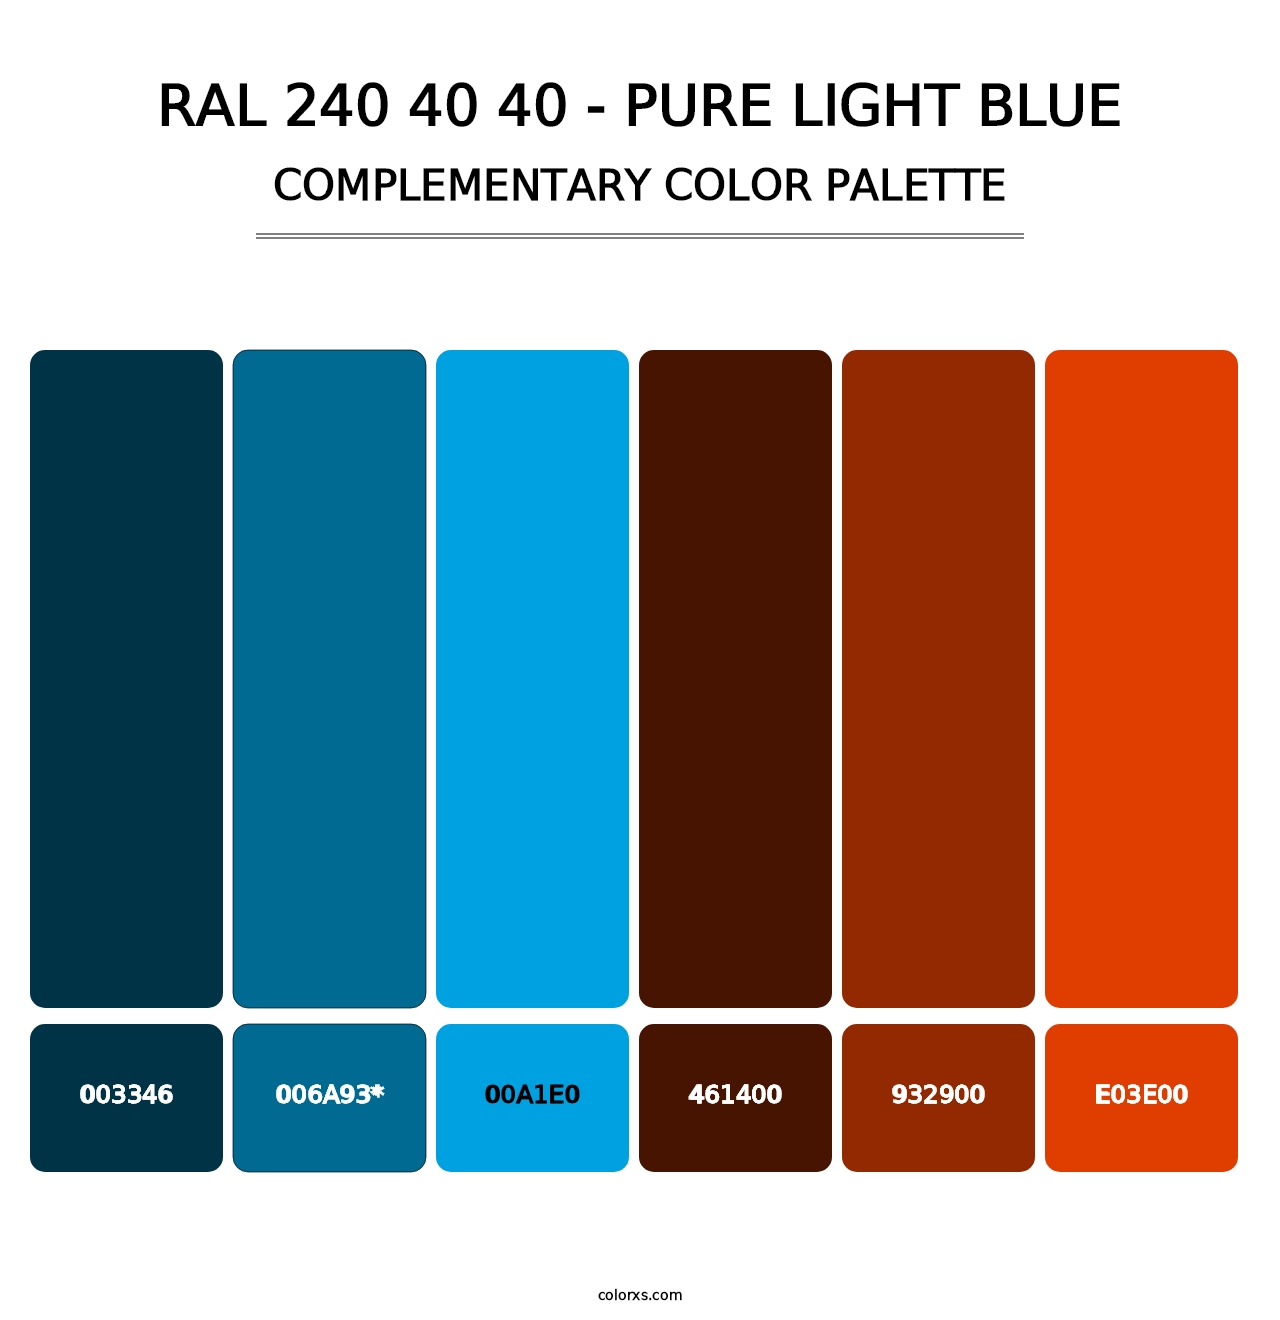 RAL 240 40 40 - Pure Light Blue - Complementary Color Palette